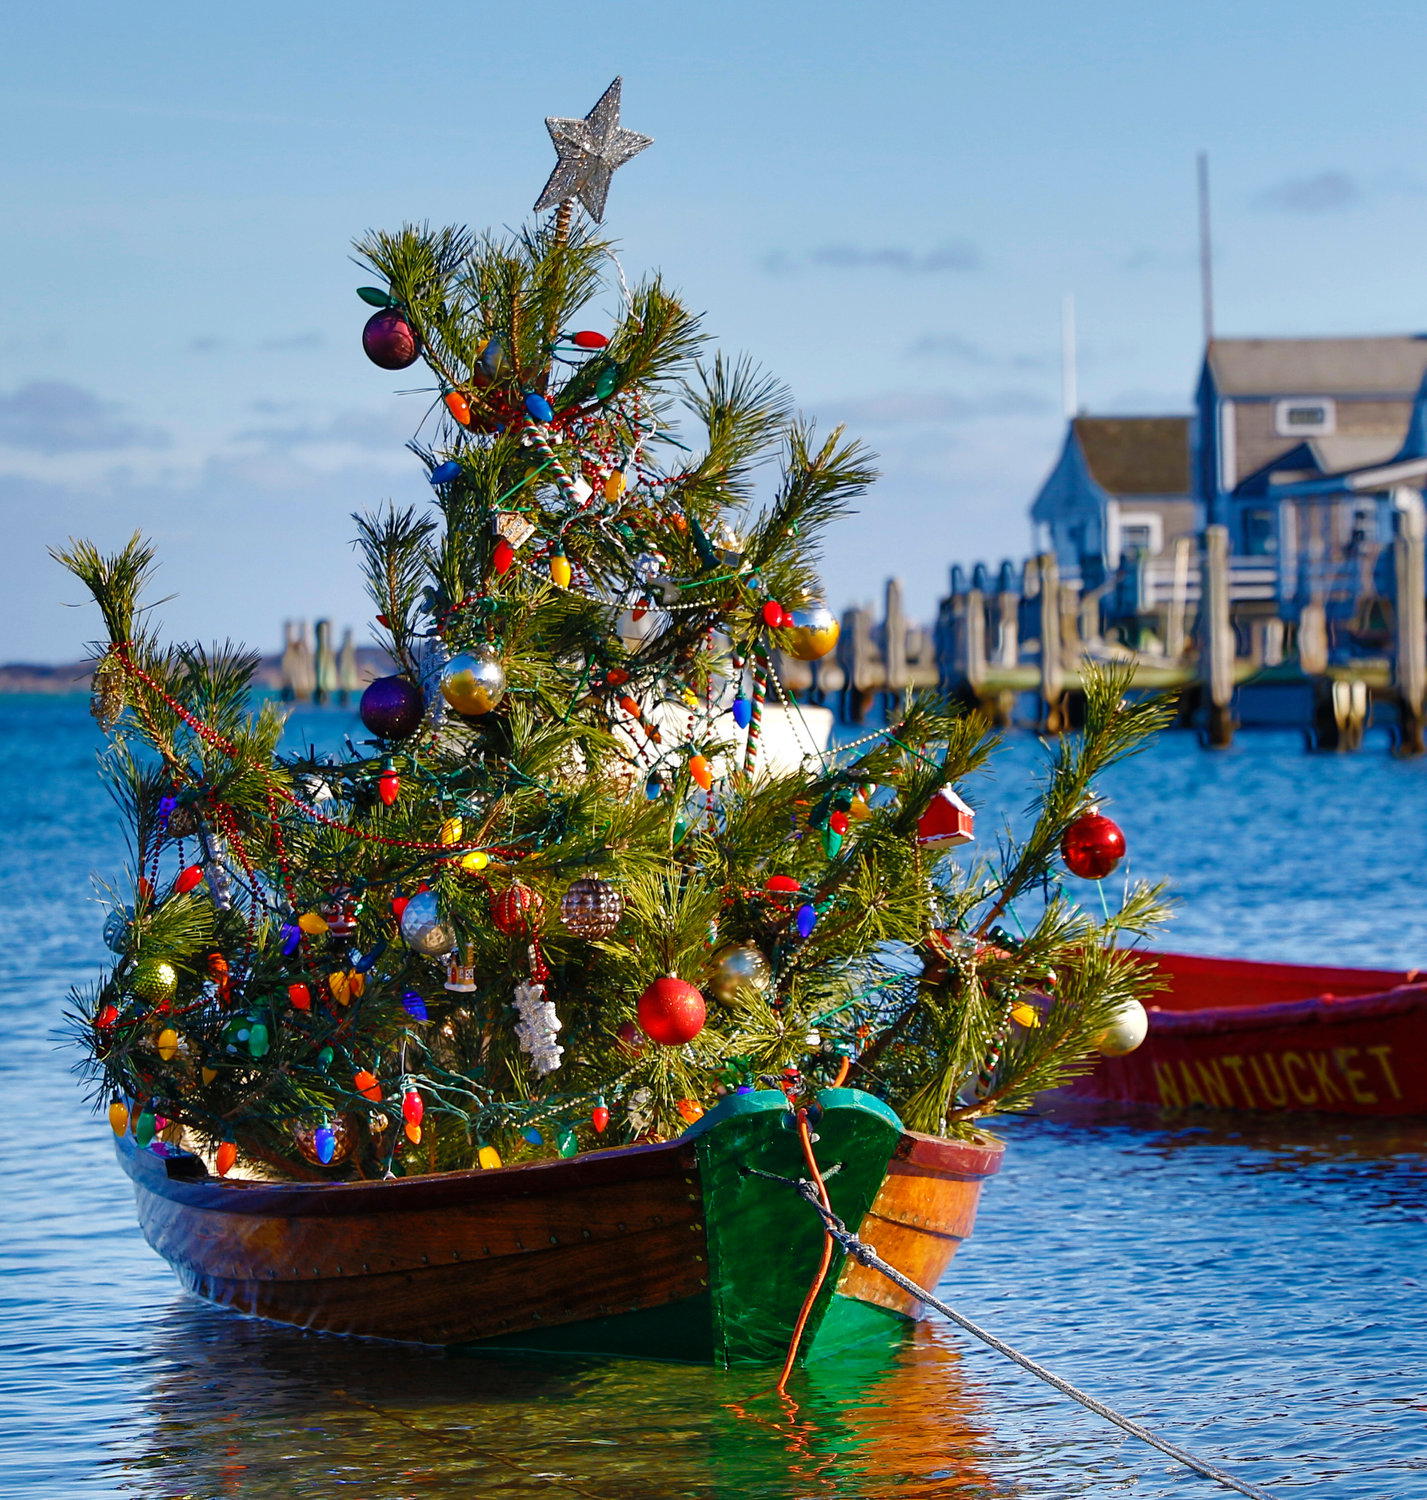 The Killen family dory in the Easy Street Basin has been an island holiday tradition for decades.